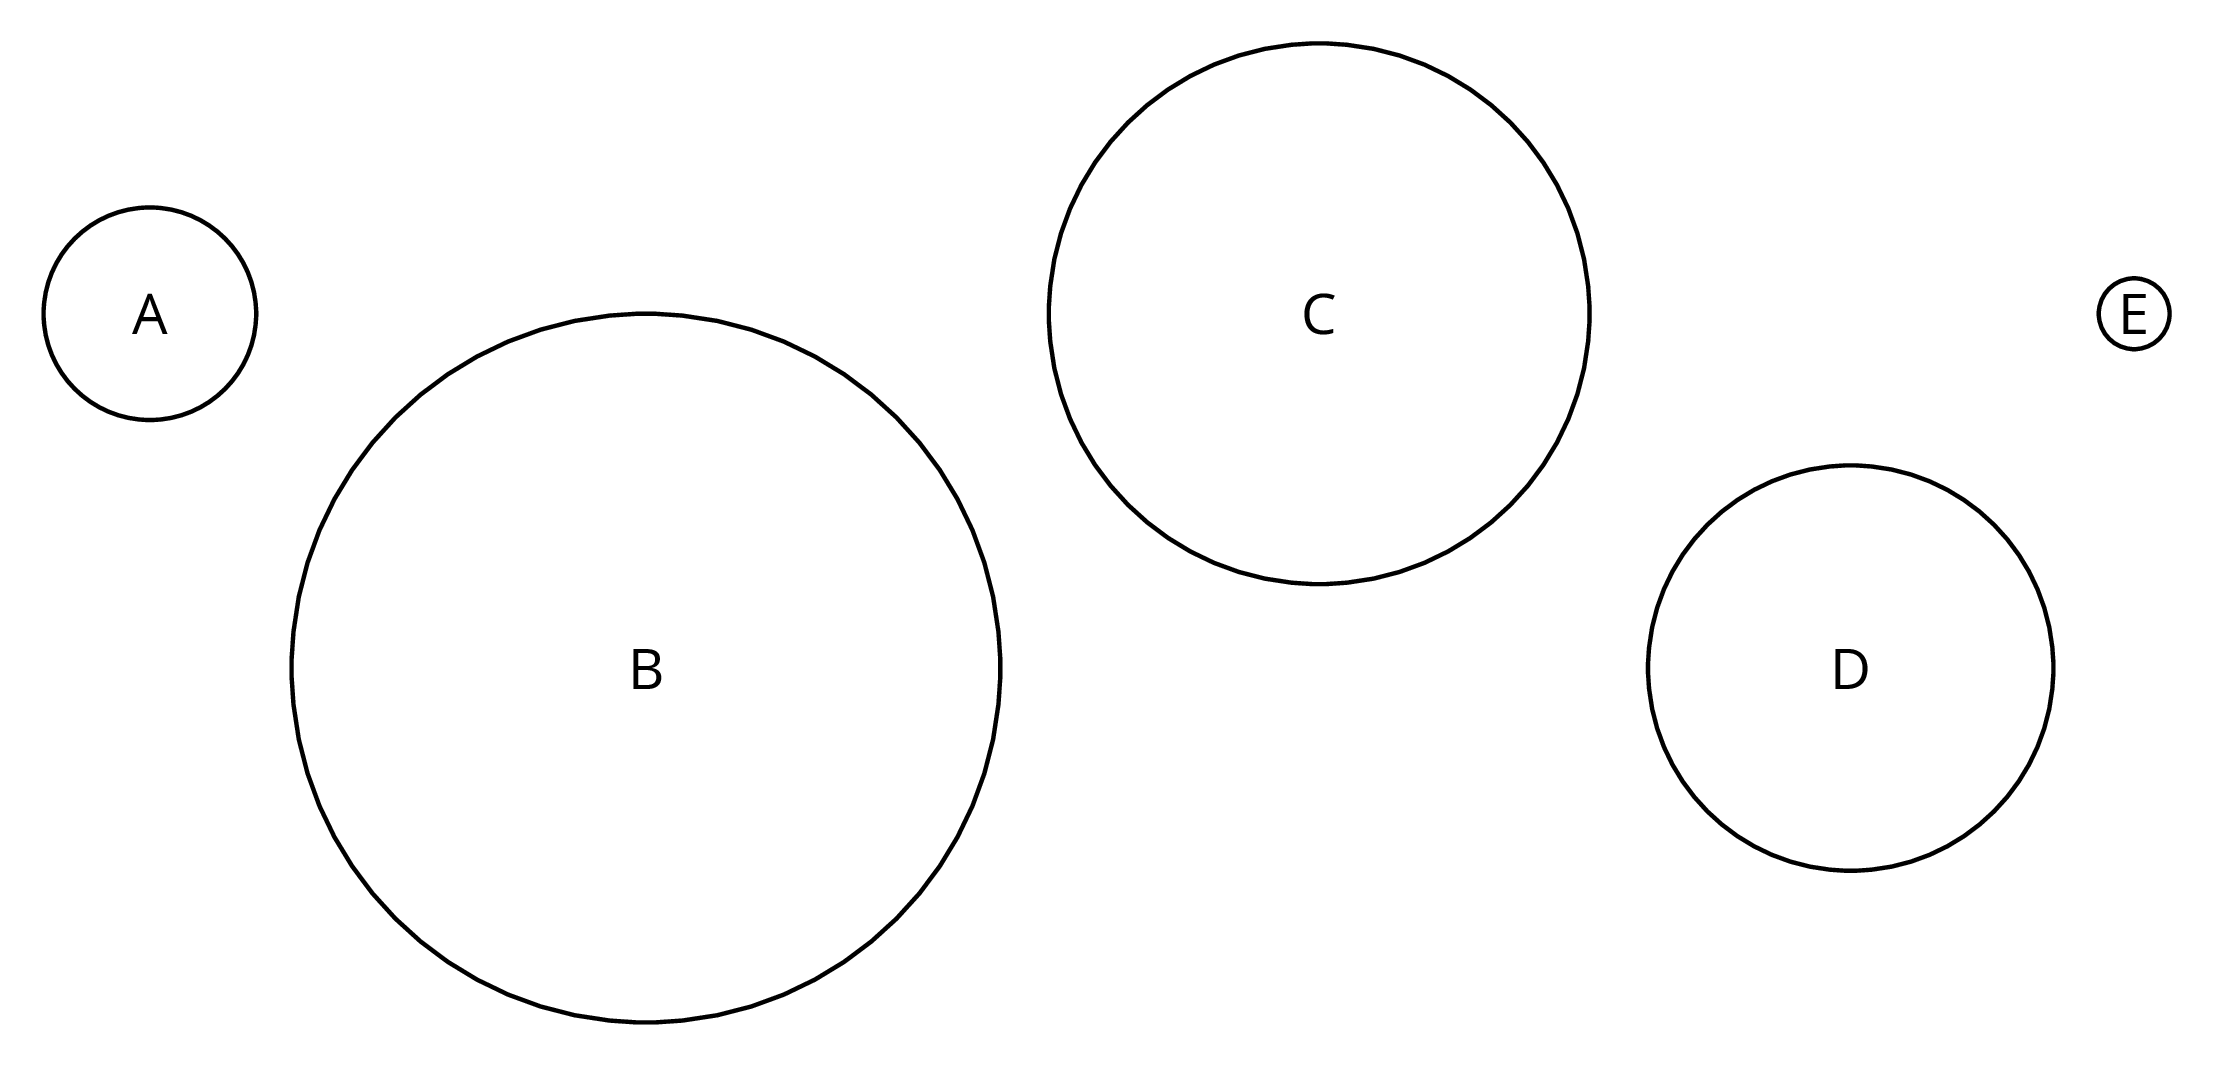 Five circles, each with a different diameter, are labeled A, B, C, D, and E.